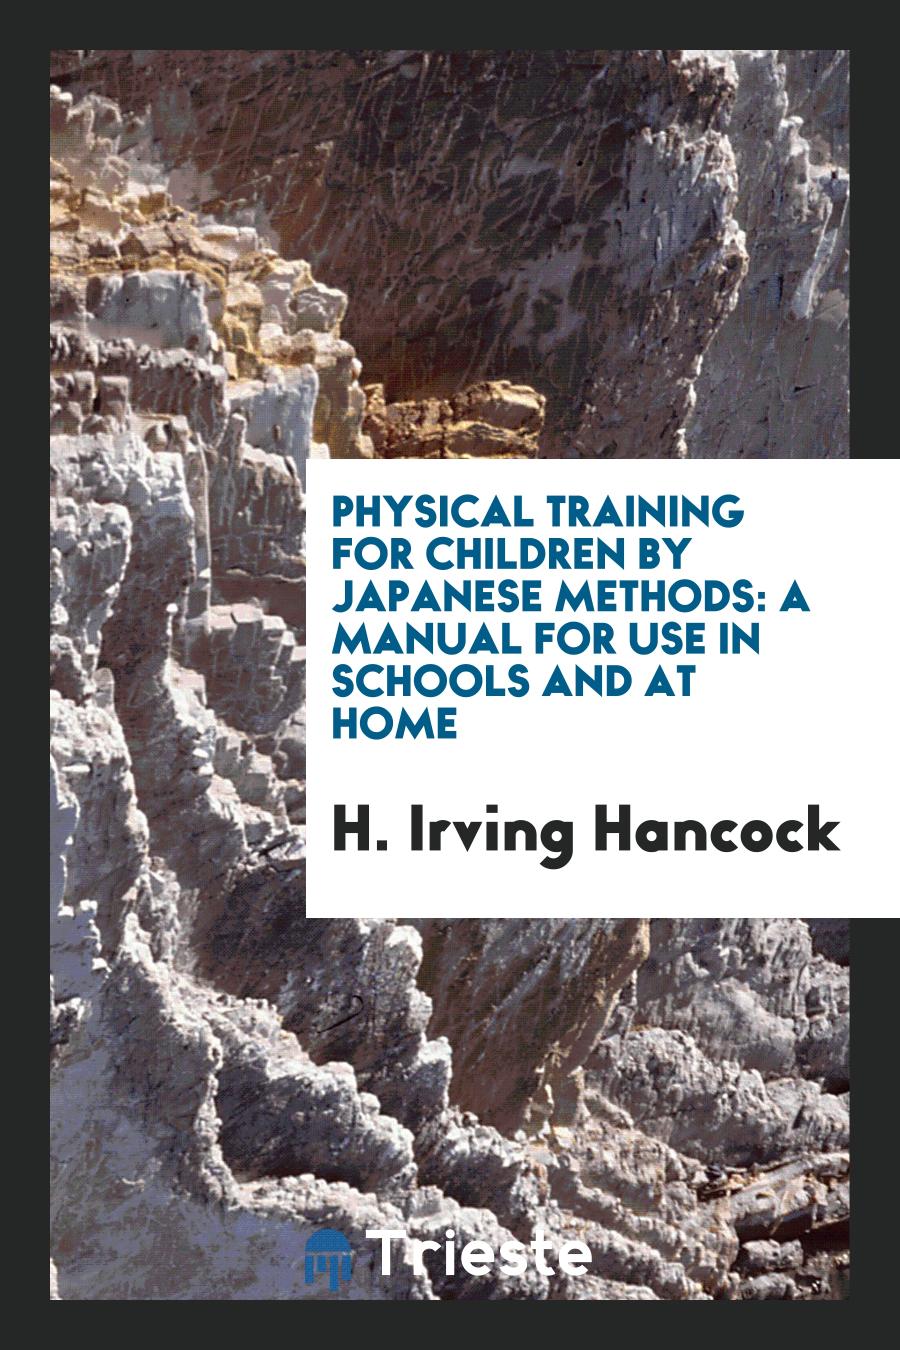 Physical Training for Children by Japanese Methods: A Manual for Use in Schools and at Home